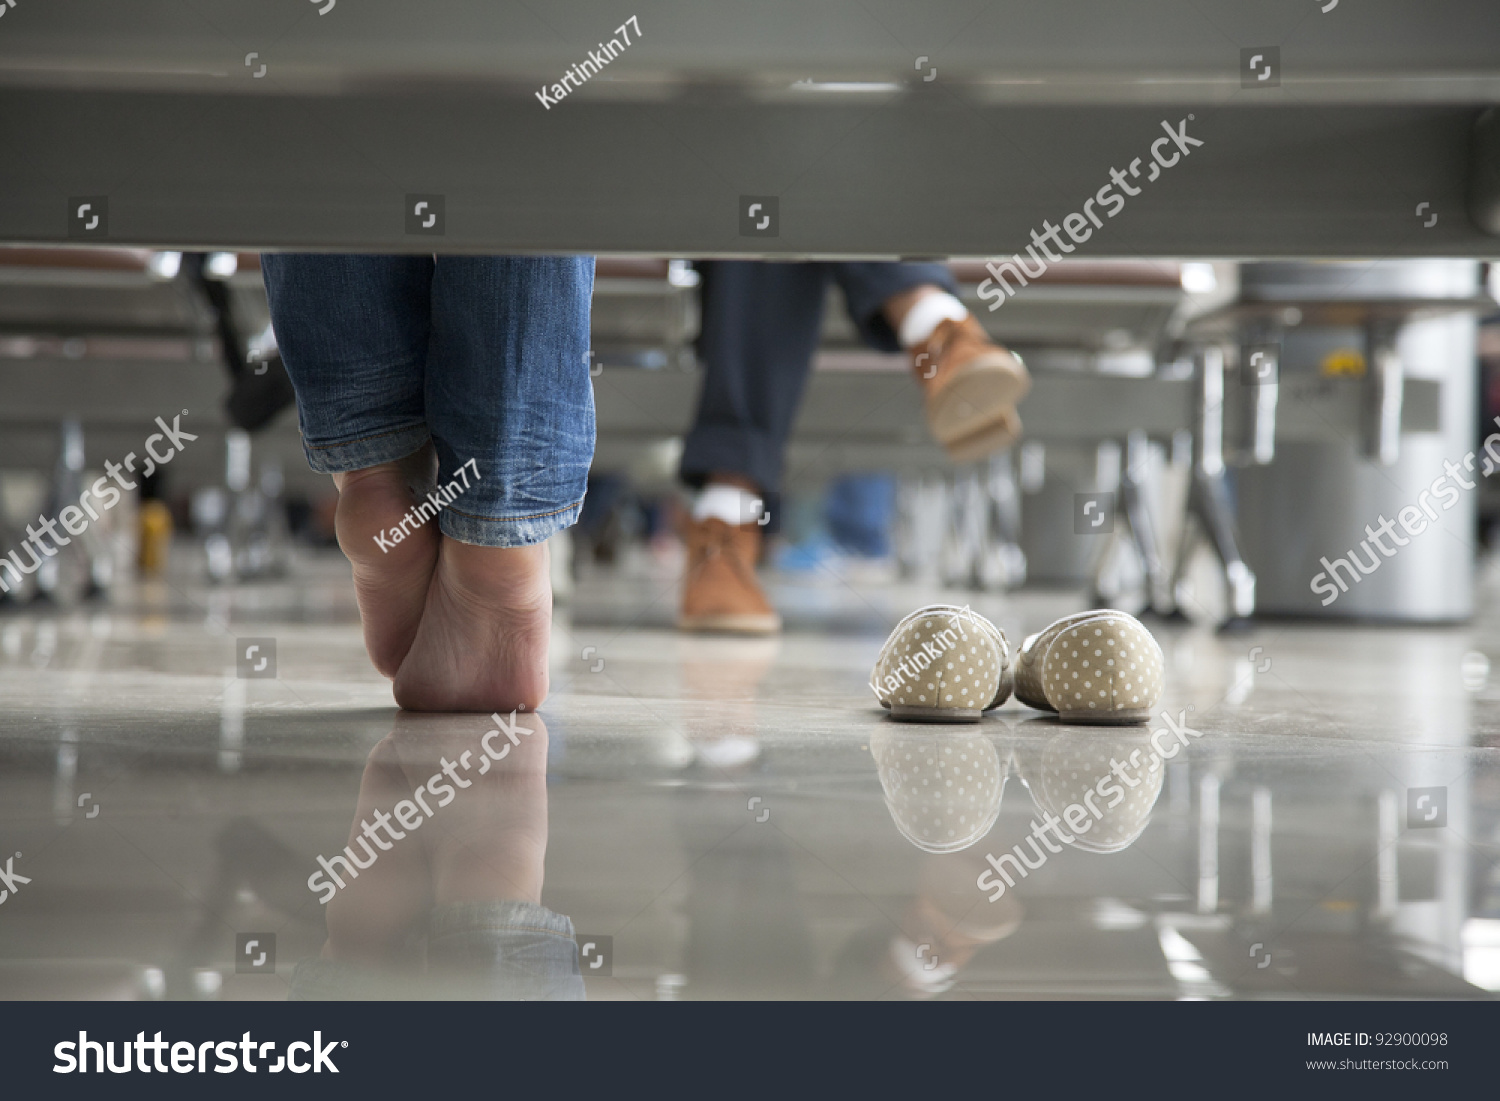 Tired Feet Of A Young Woman Having A Rest From Her Shoes Stock Photo ...